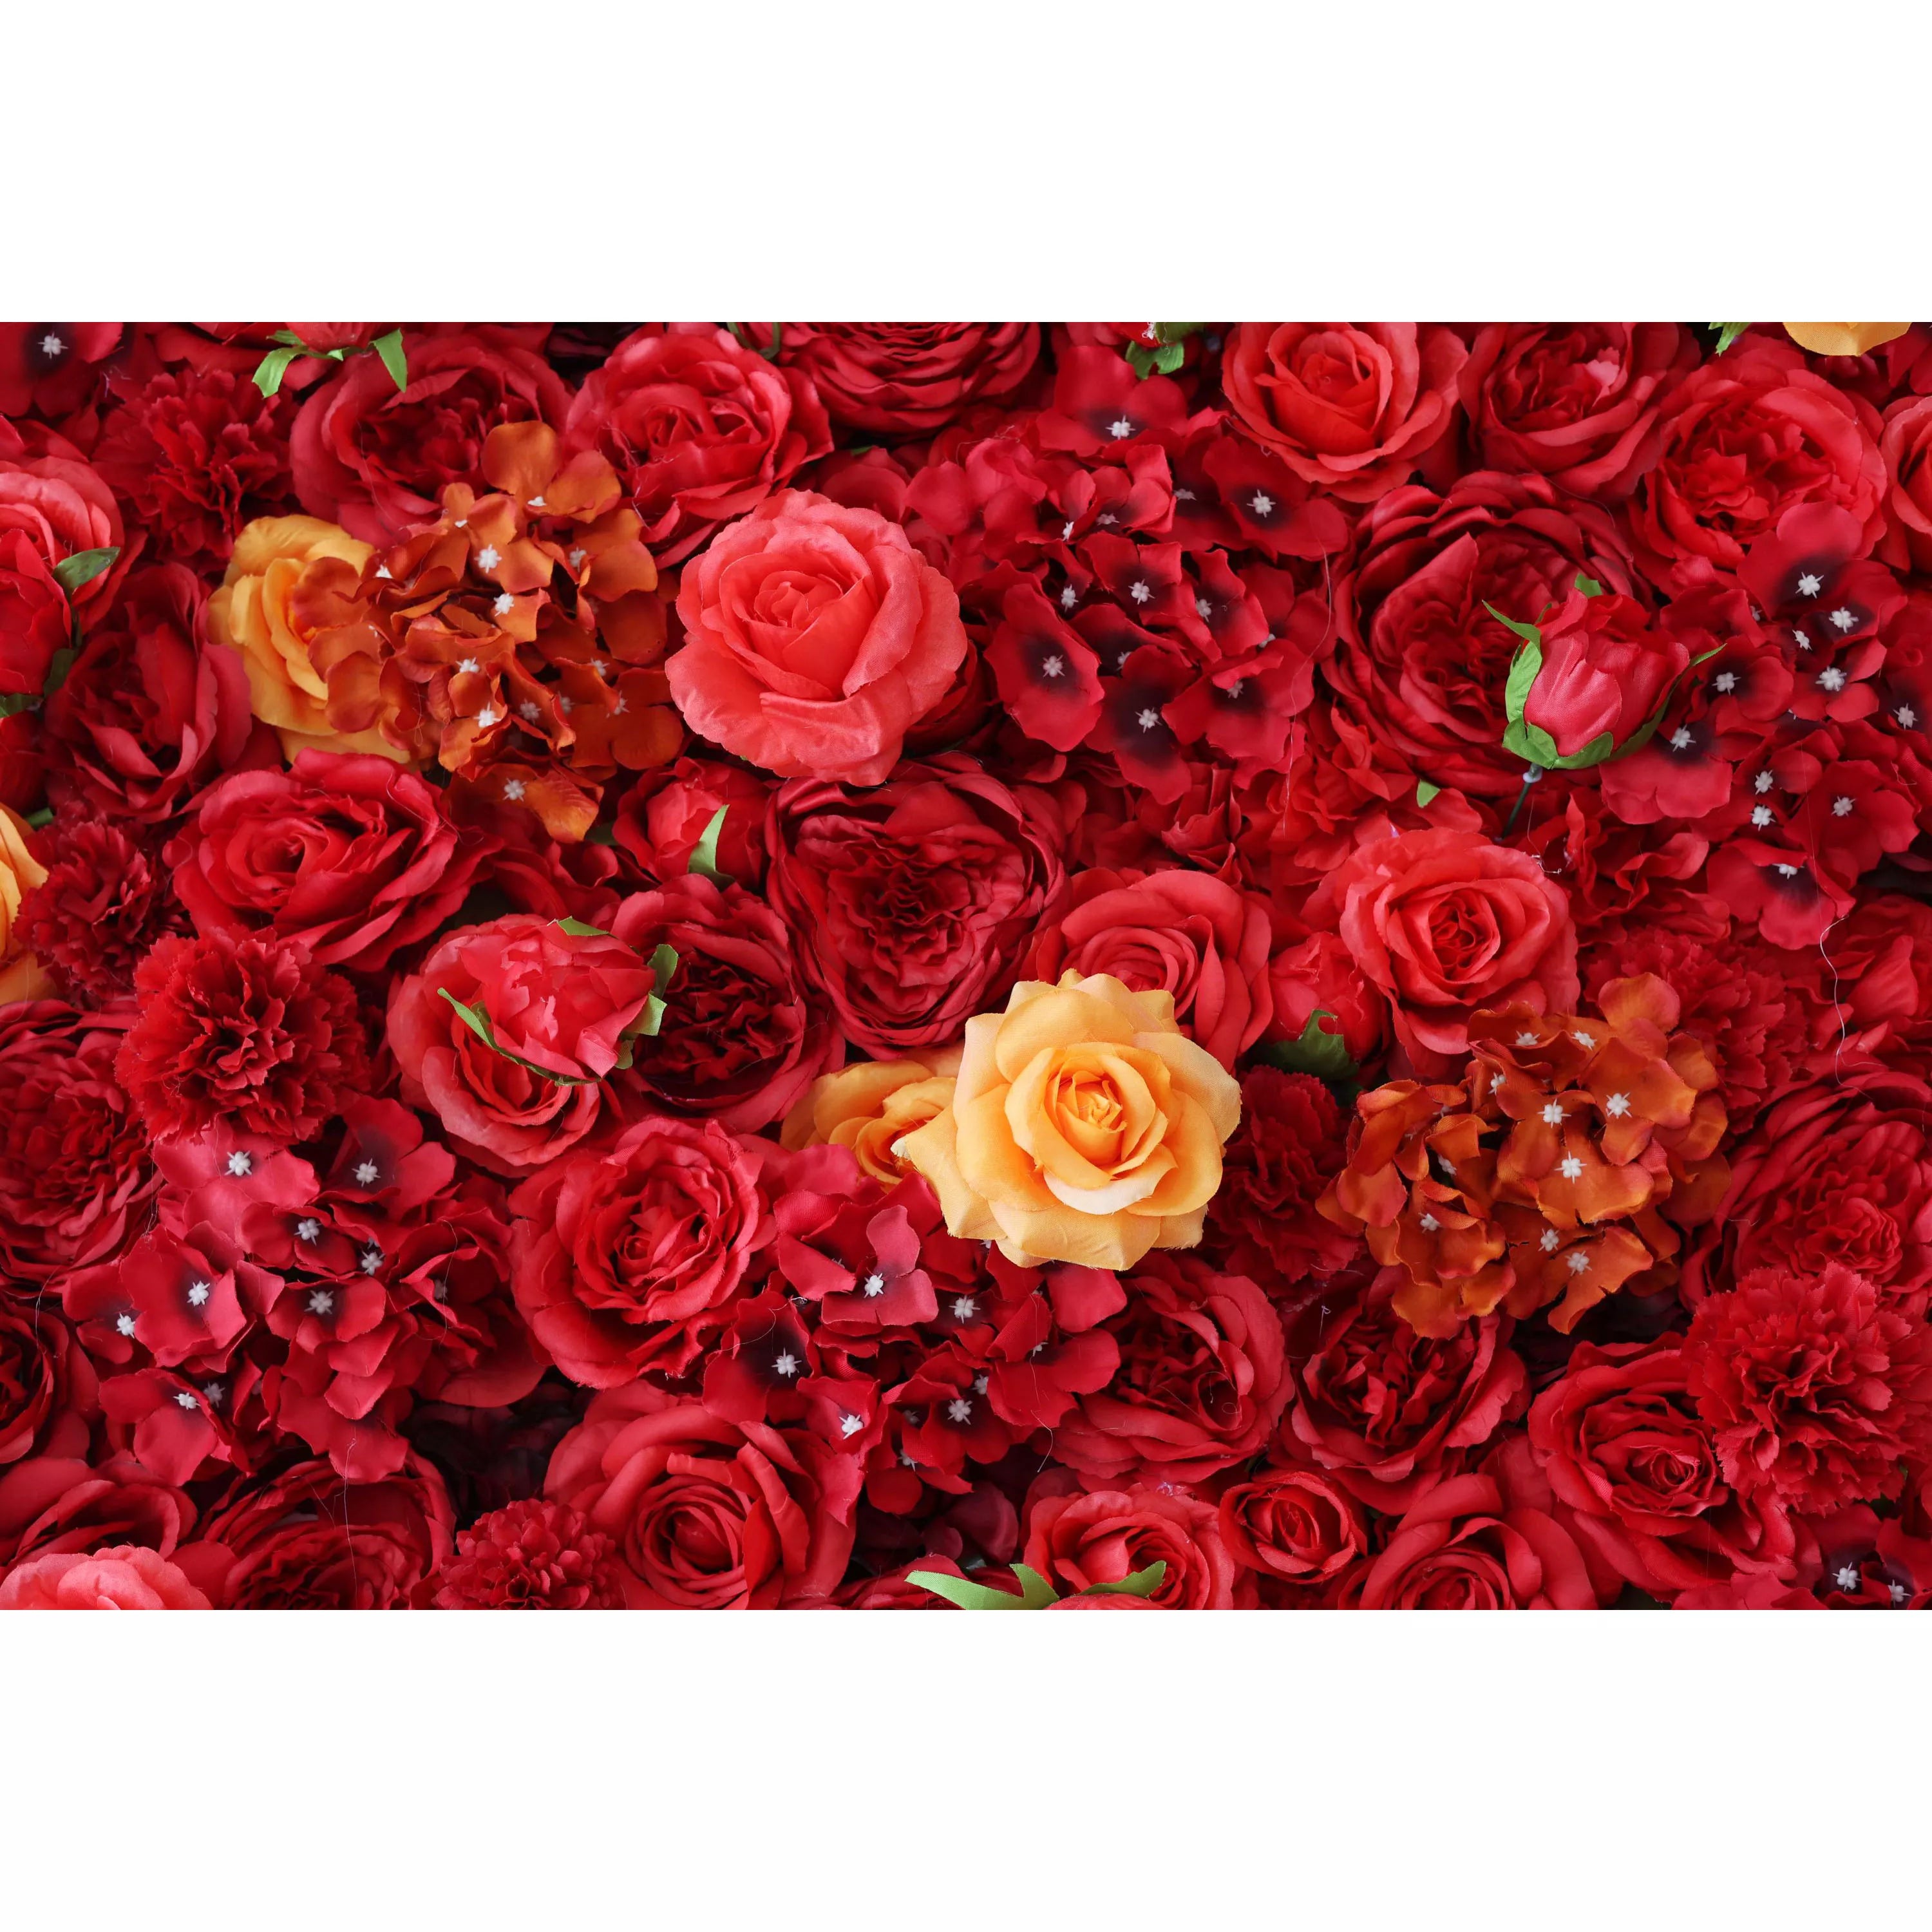 ValarFlowers Artificial Floral Wall Backdrop: Radiant Red Resplendence - The Passionate Pinnacle of Floral Elegance-VF-245